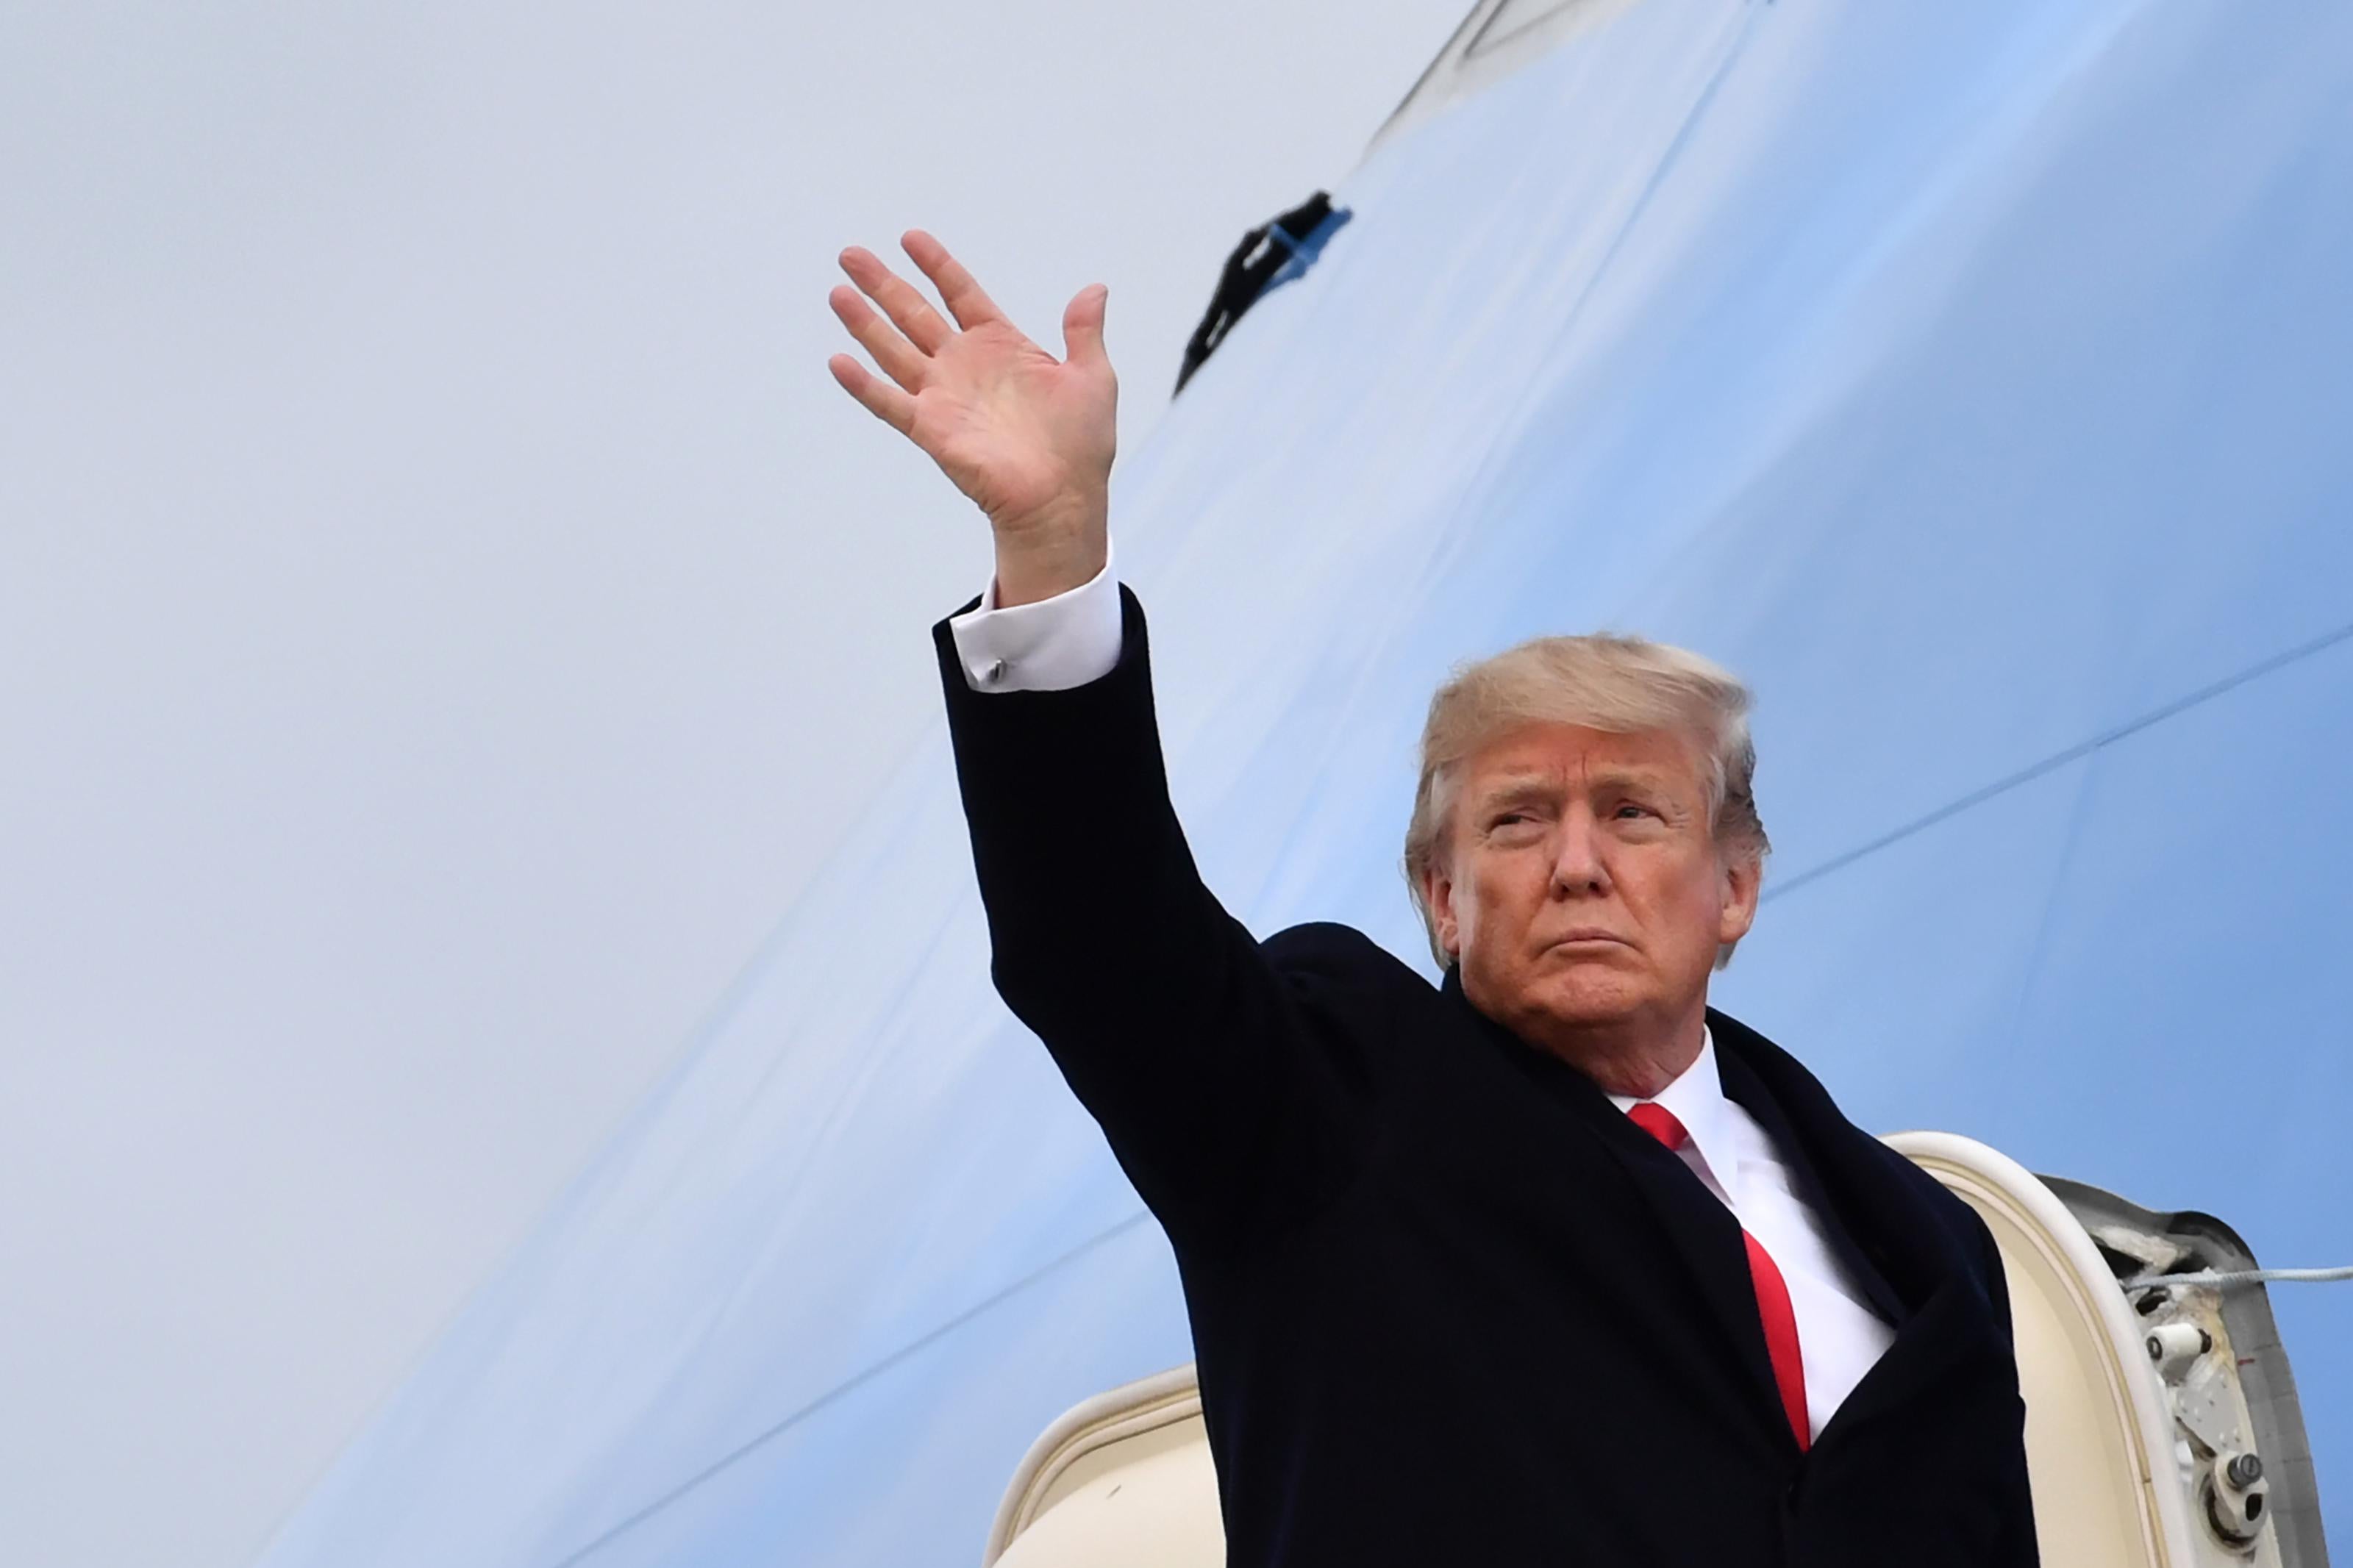 US President Donald Trump waves before boarding the Air Force One ahead of his departure from Zurich Airport in Zurich on January 26, 2018, after attending the World Economic Forum (WEF) annual meeting in Davos. / AFP PHOTO / Nicholas Kamm        (Photo credit should read NICHOLAS KAMM/AFP/Getty Images)